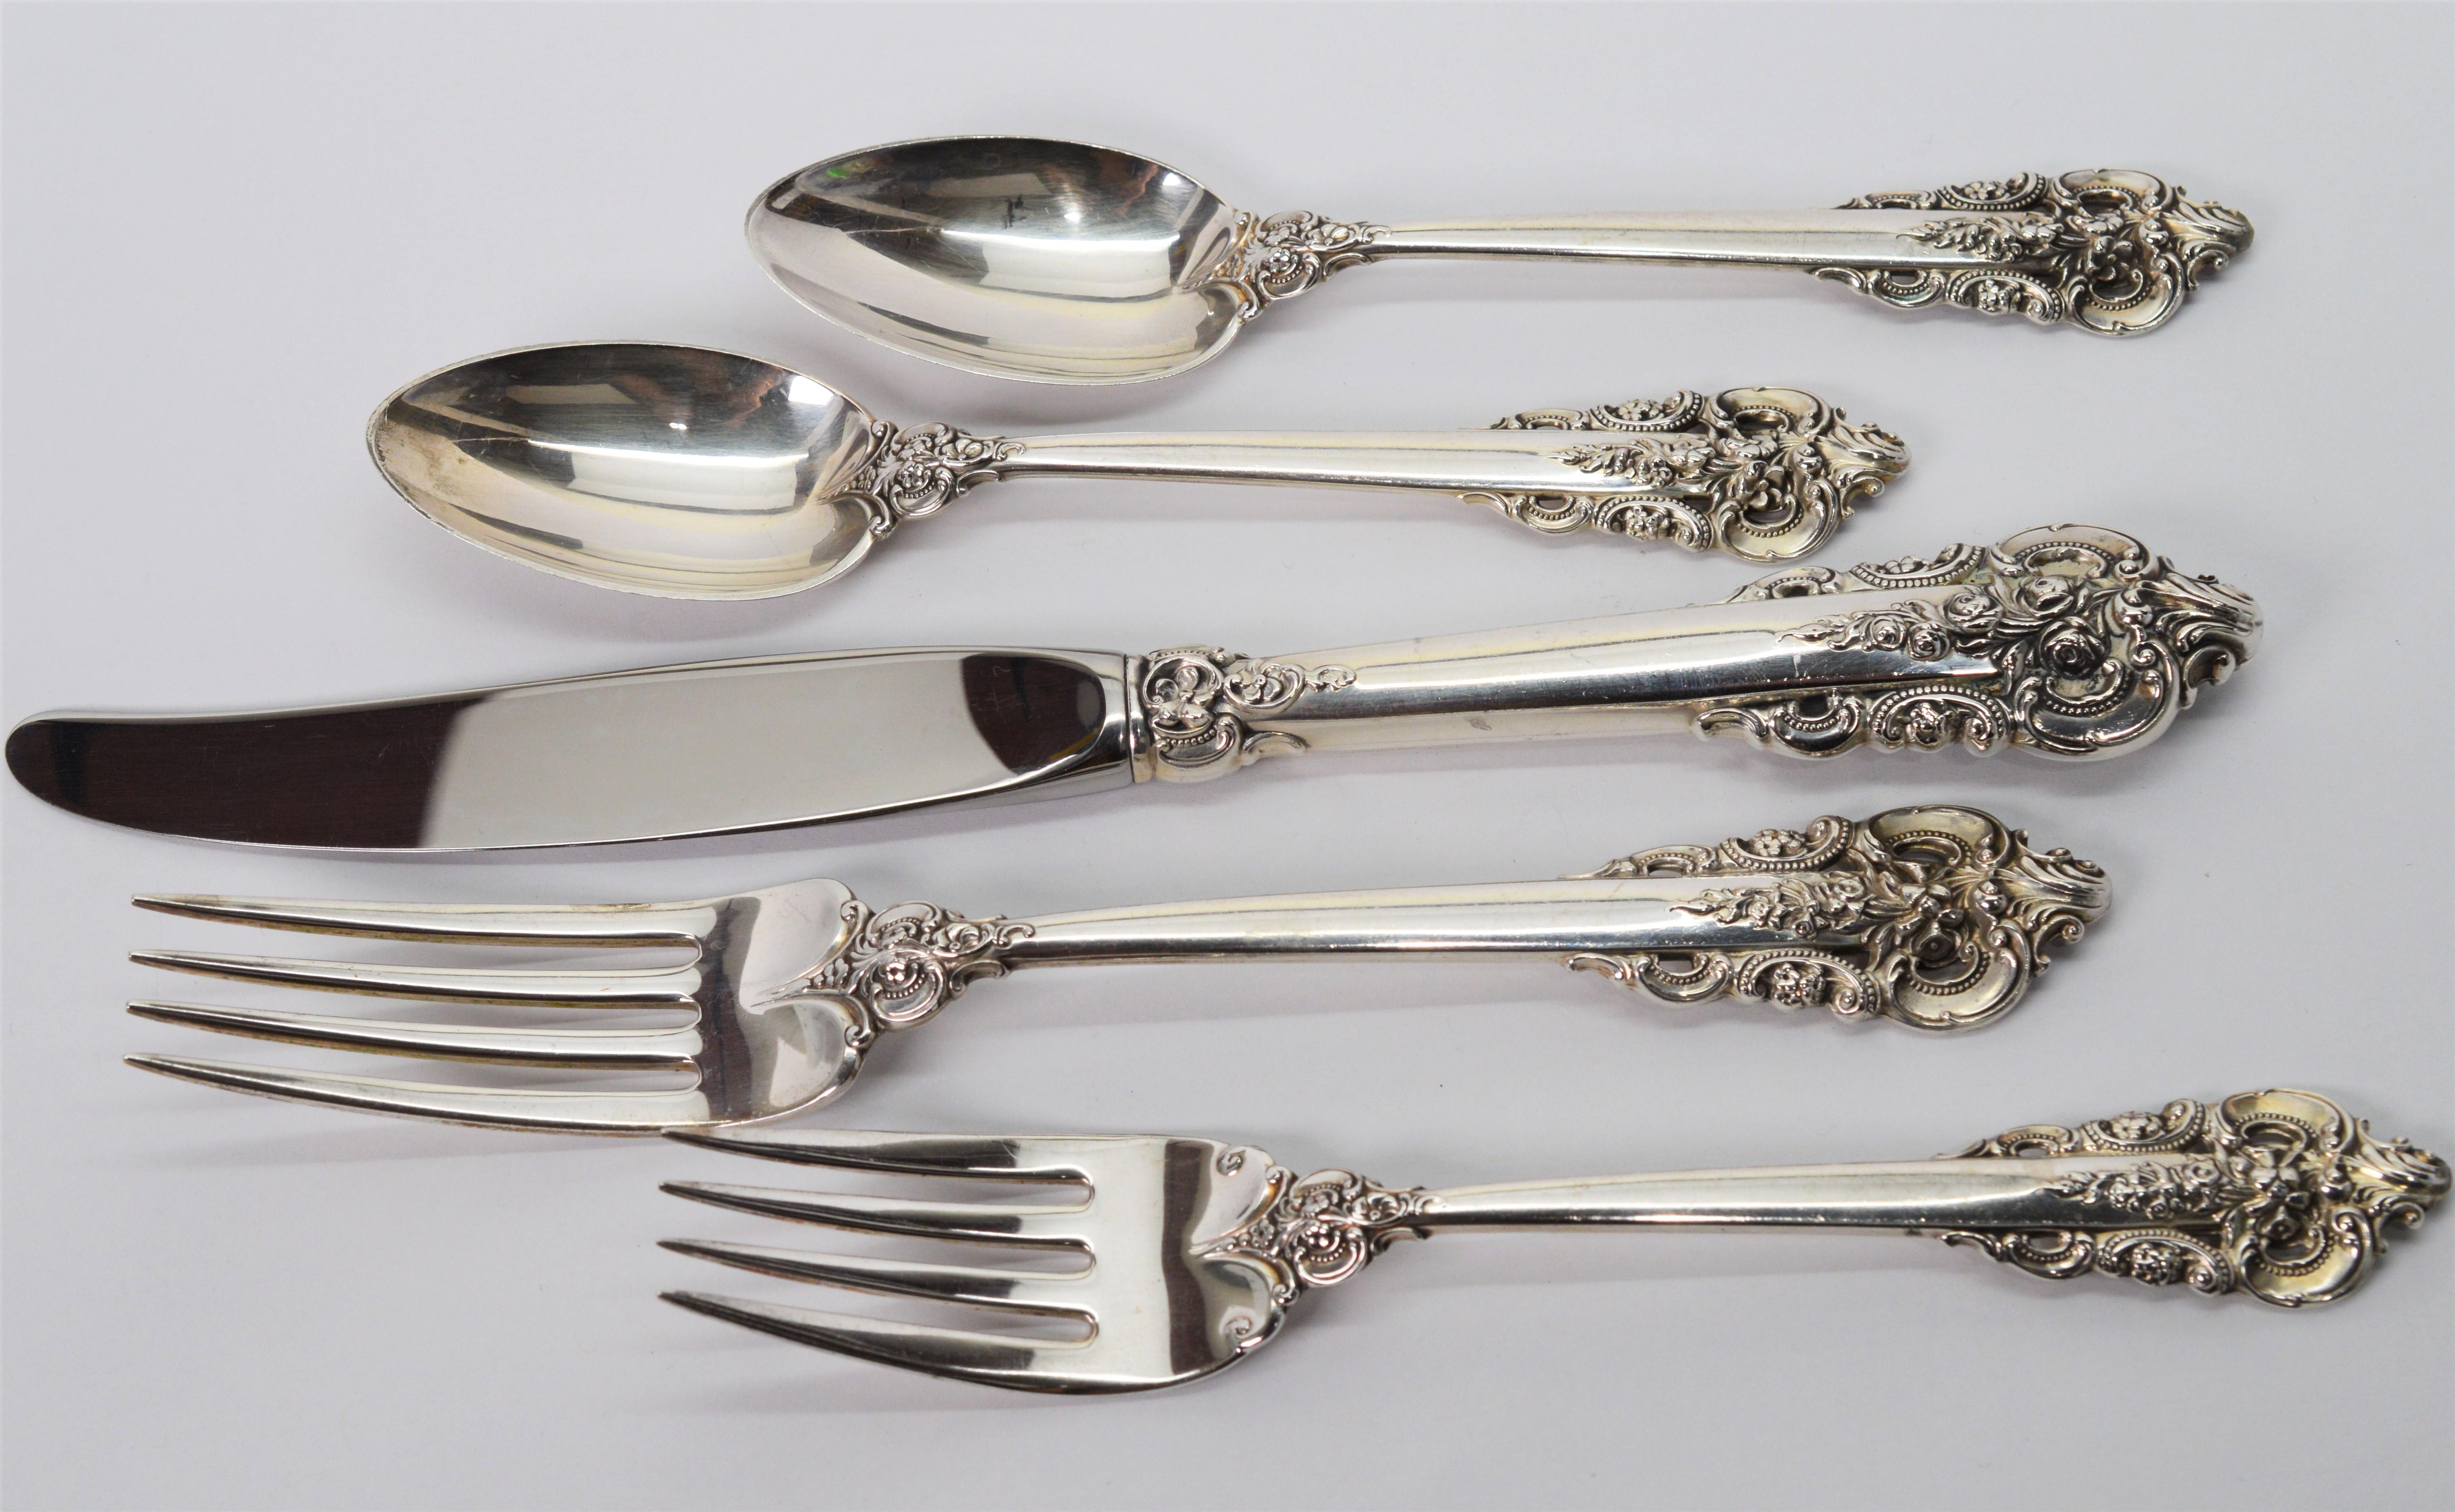 First produced in 1941, the design of Wallace Grande Baroque silverware was created by William S. Warren to celebrate the art of the Baroque period. Grand Baroque by Wallace Silversmiths is one of the most popular patterns in sterling silver and